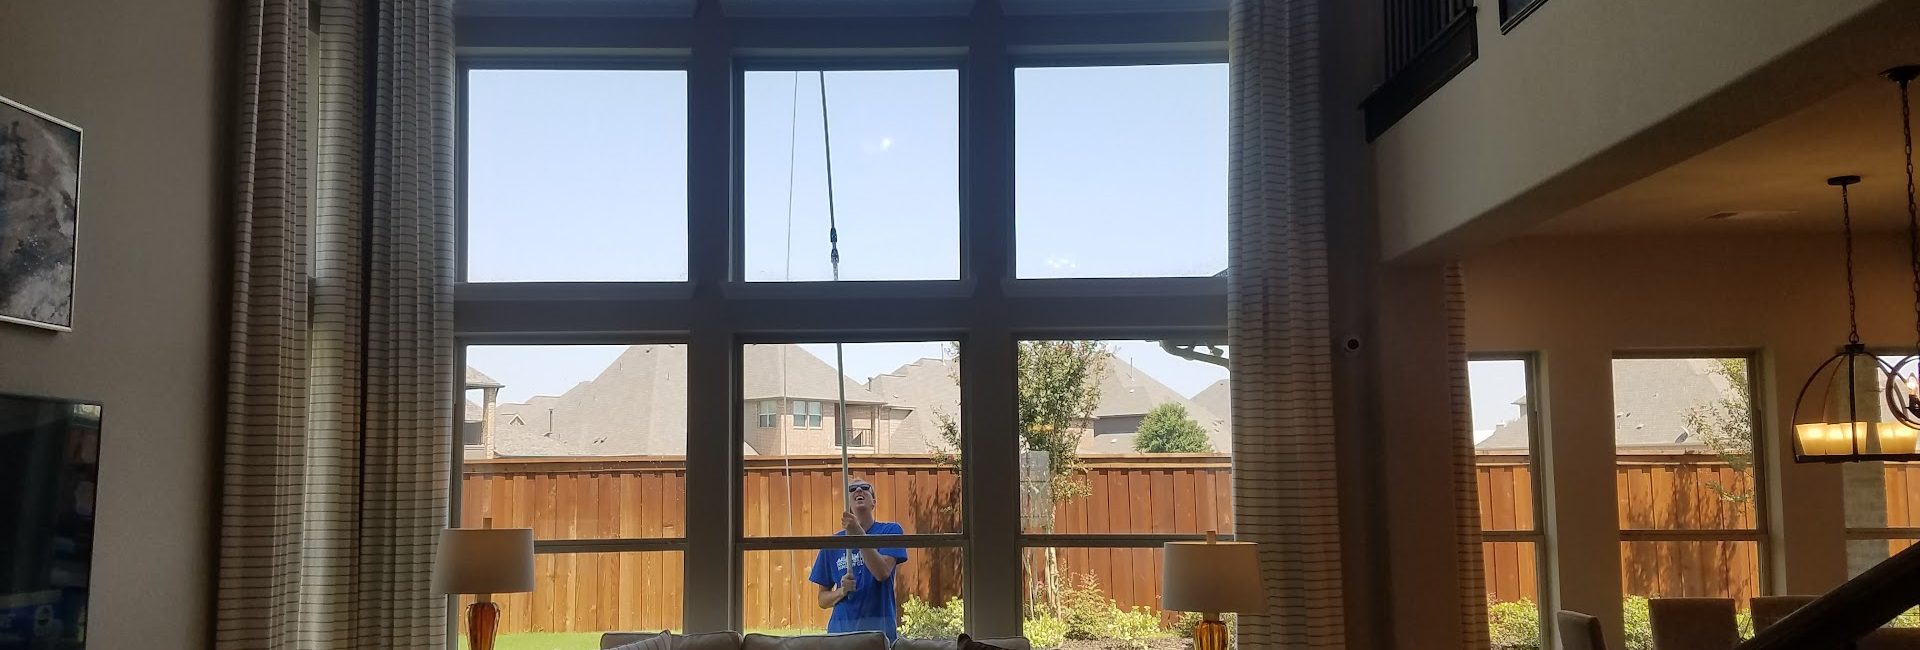 North Dallas Window Cleaning 3